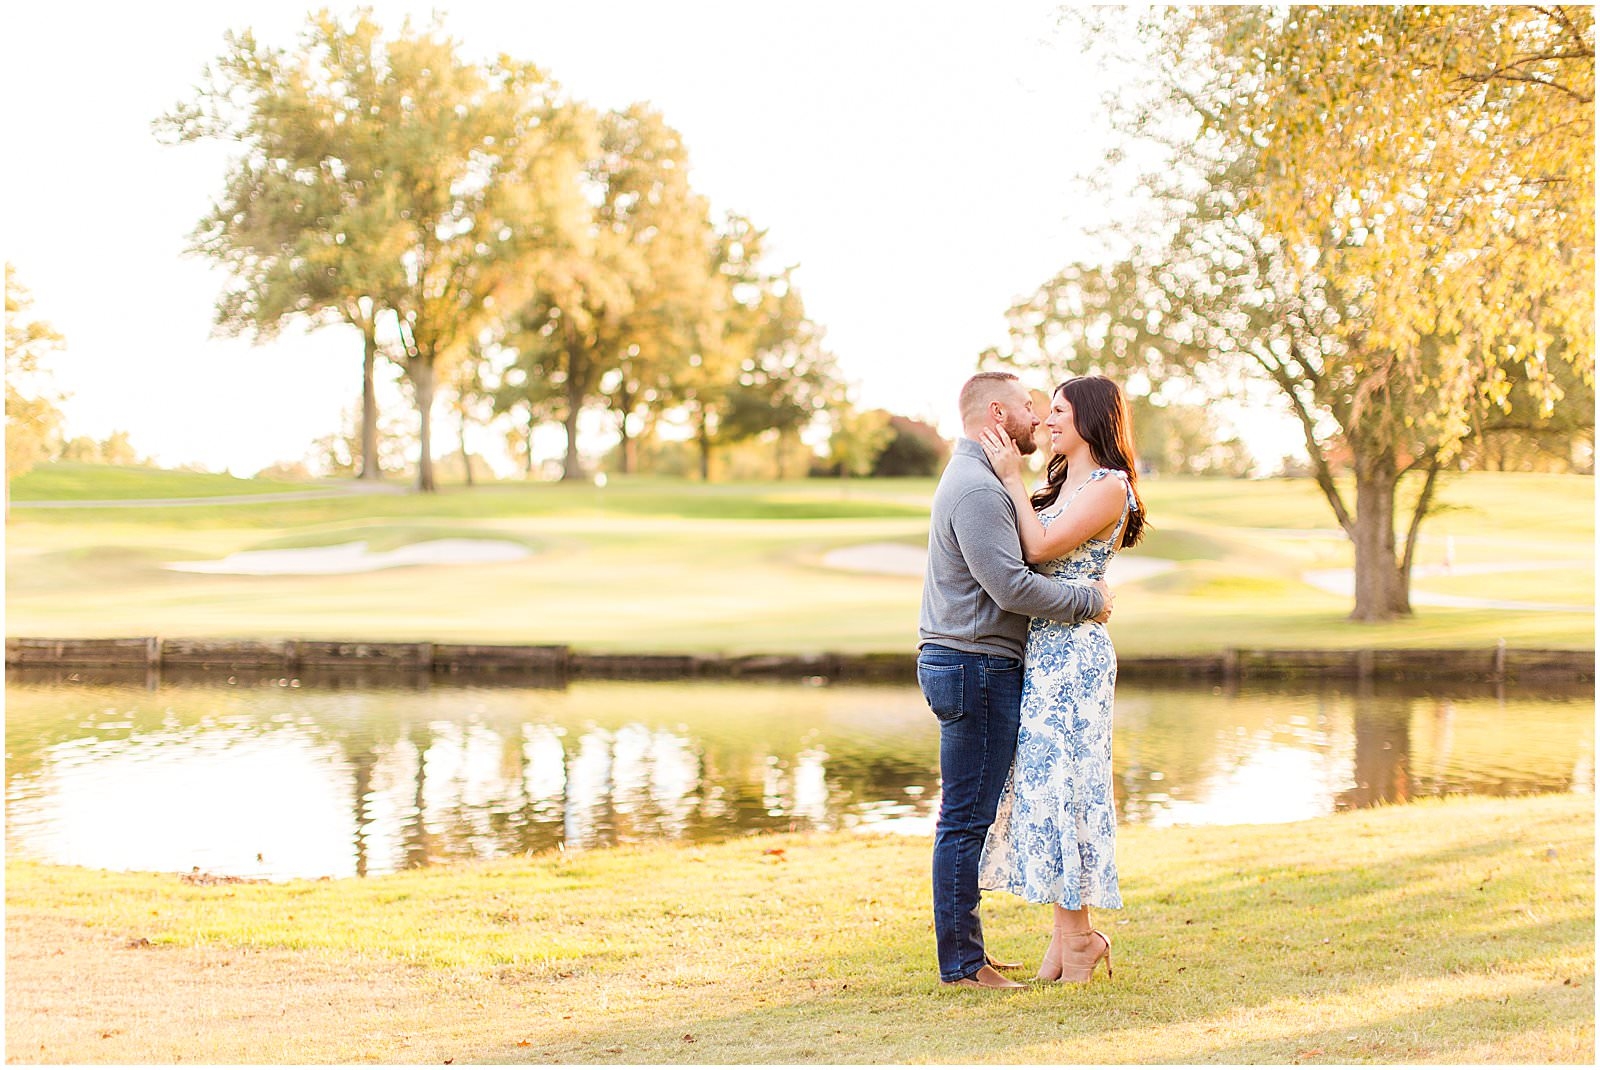 A Rolling Hills Country Club Engagement Session | Meagan and Kyle | Bret and Brandie Photography 0041.jpg